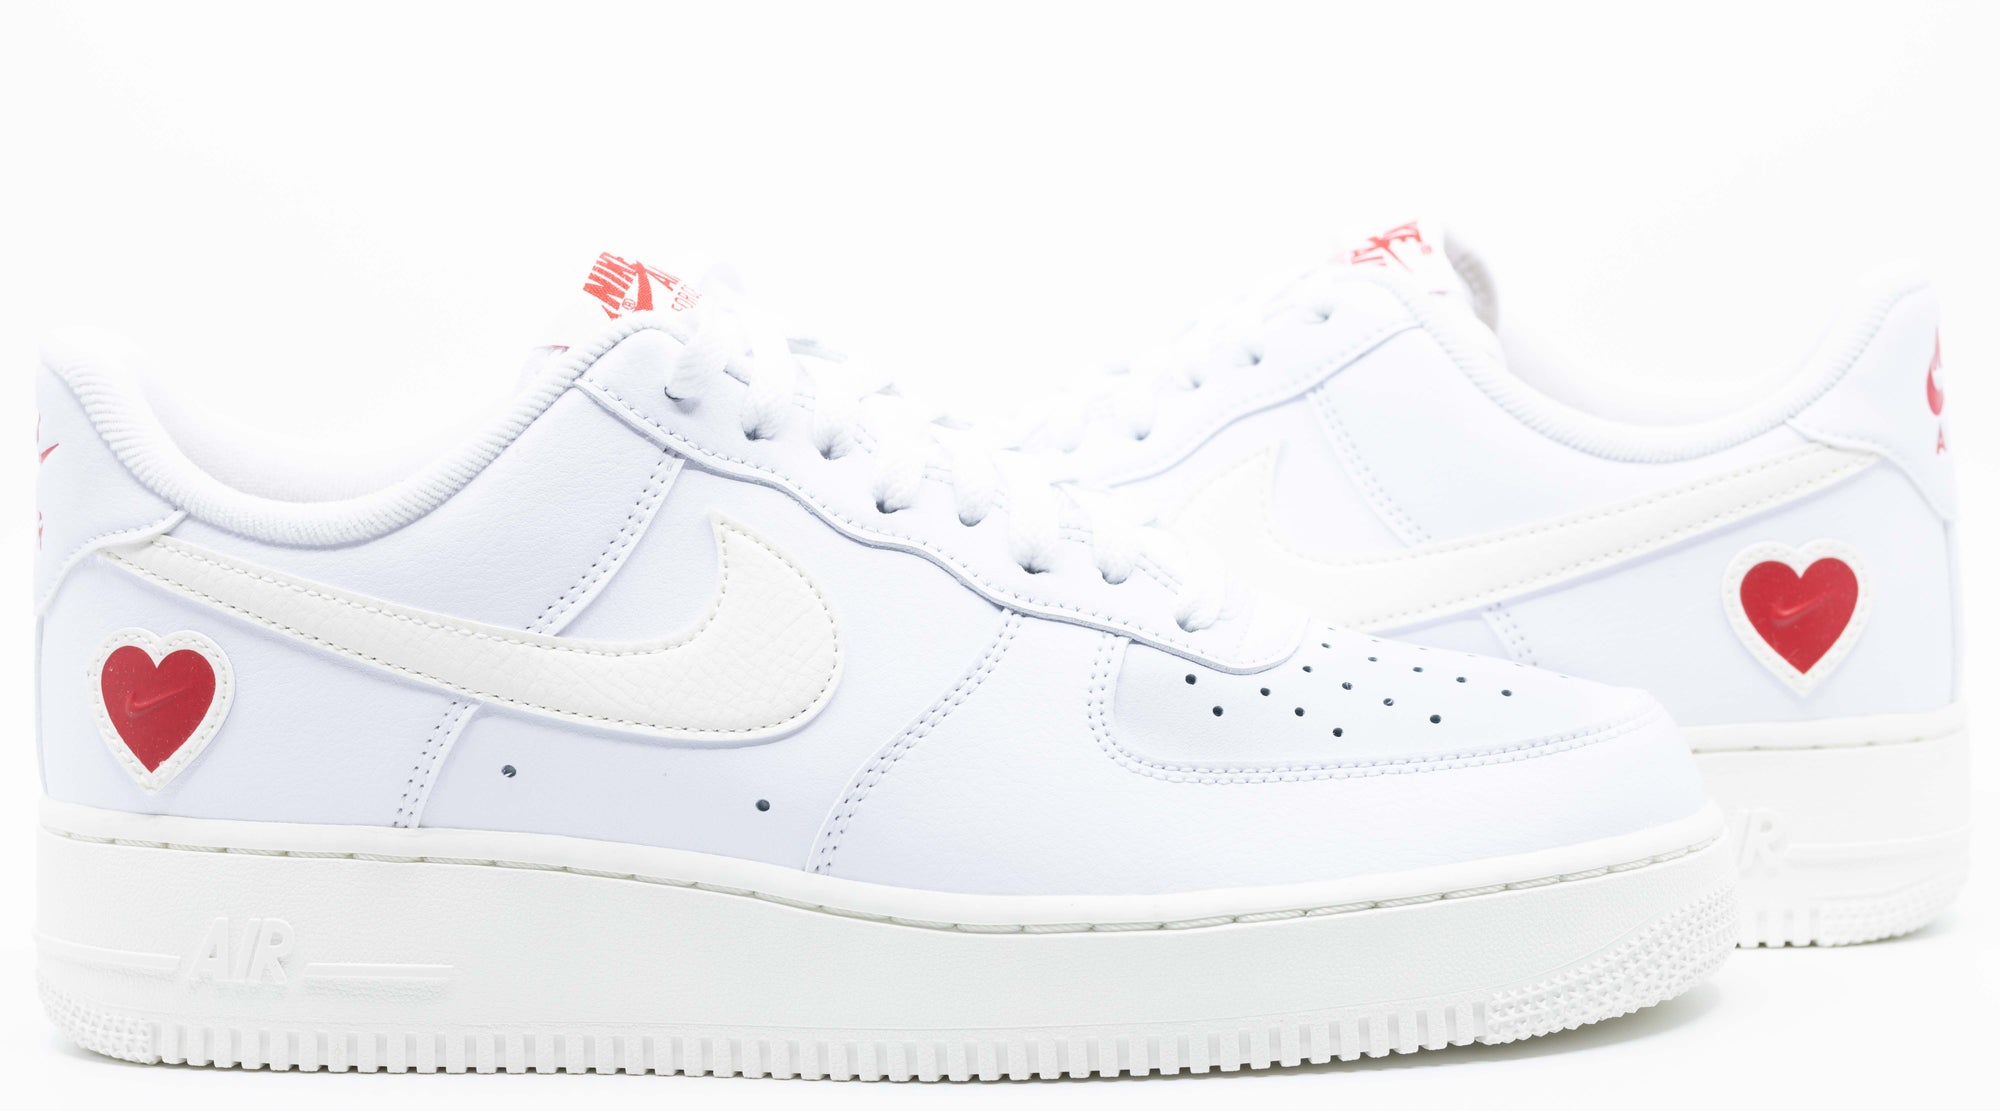 Nike Air Force 1 Low "Valentines Day 2021"